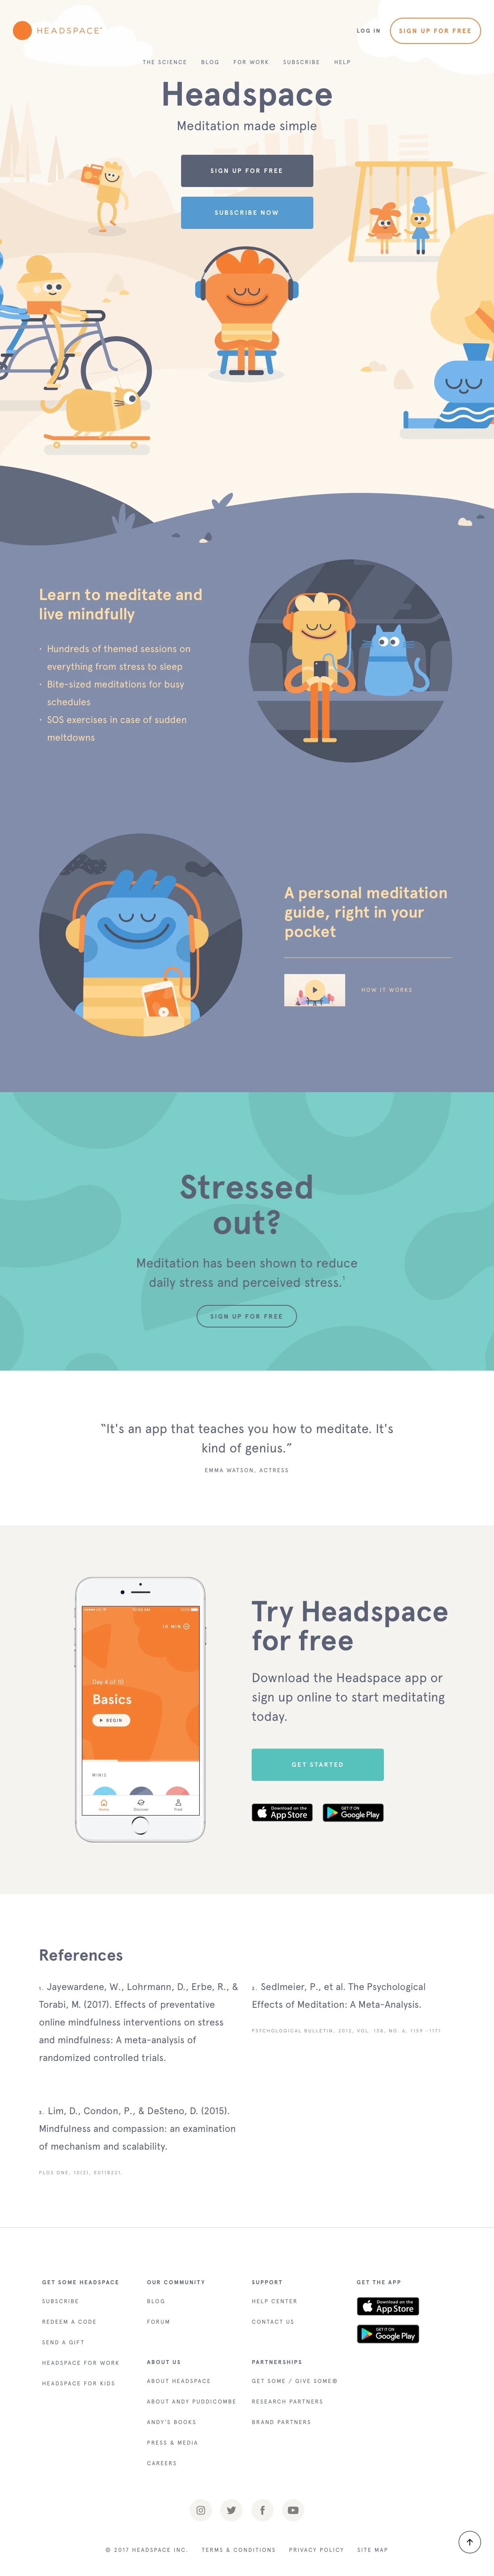 Headspace Landing Page Example: Meditation and mindfulness made simple